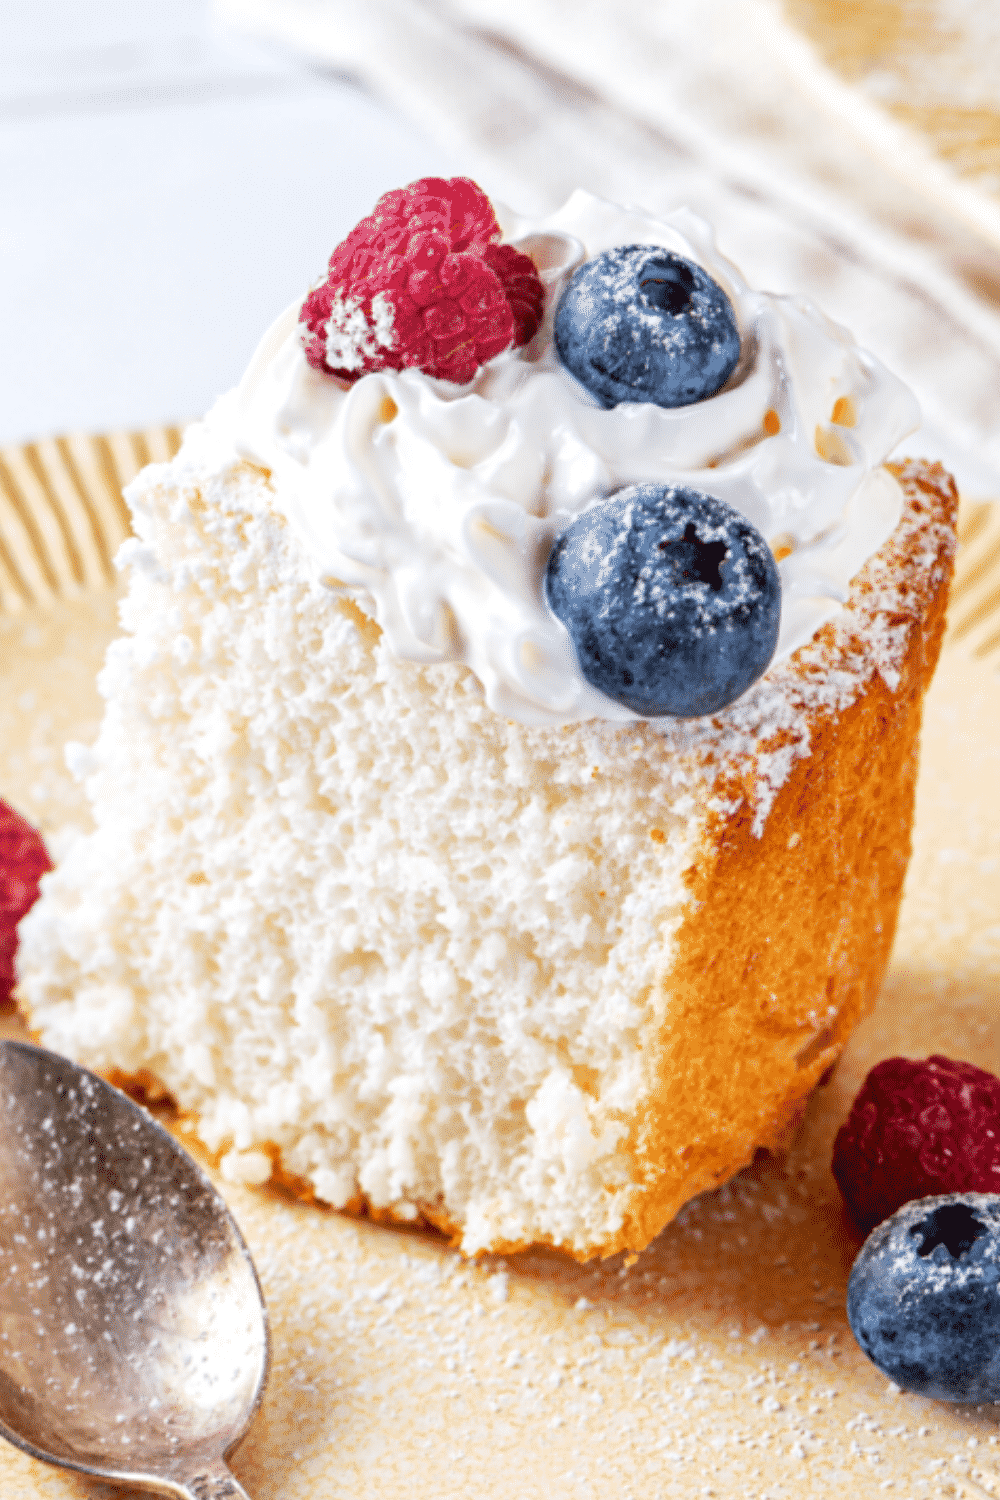 A piece of angel food cake on a plate. The piece of angel food cake has whipped cream and two blueberries and one raspberry on top.